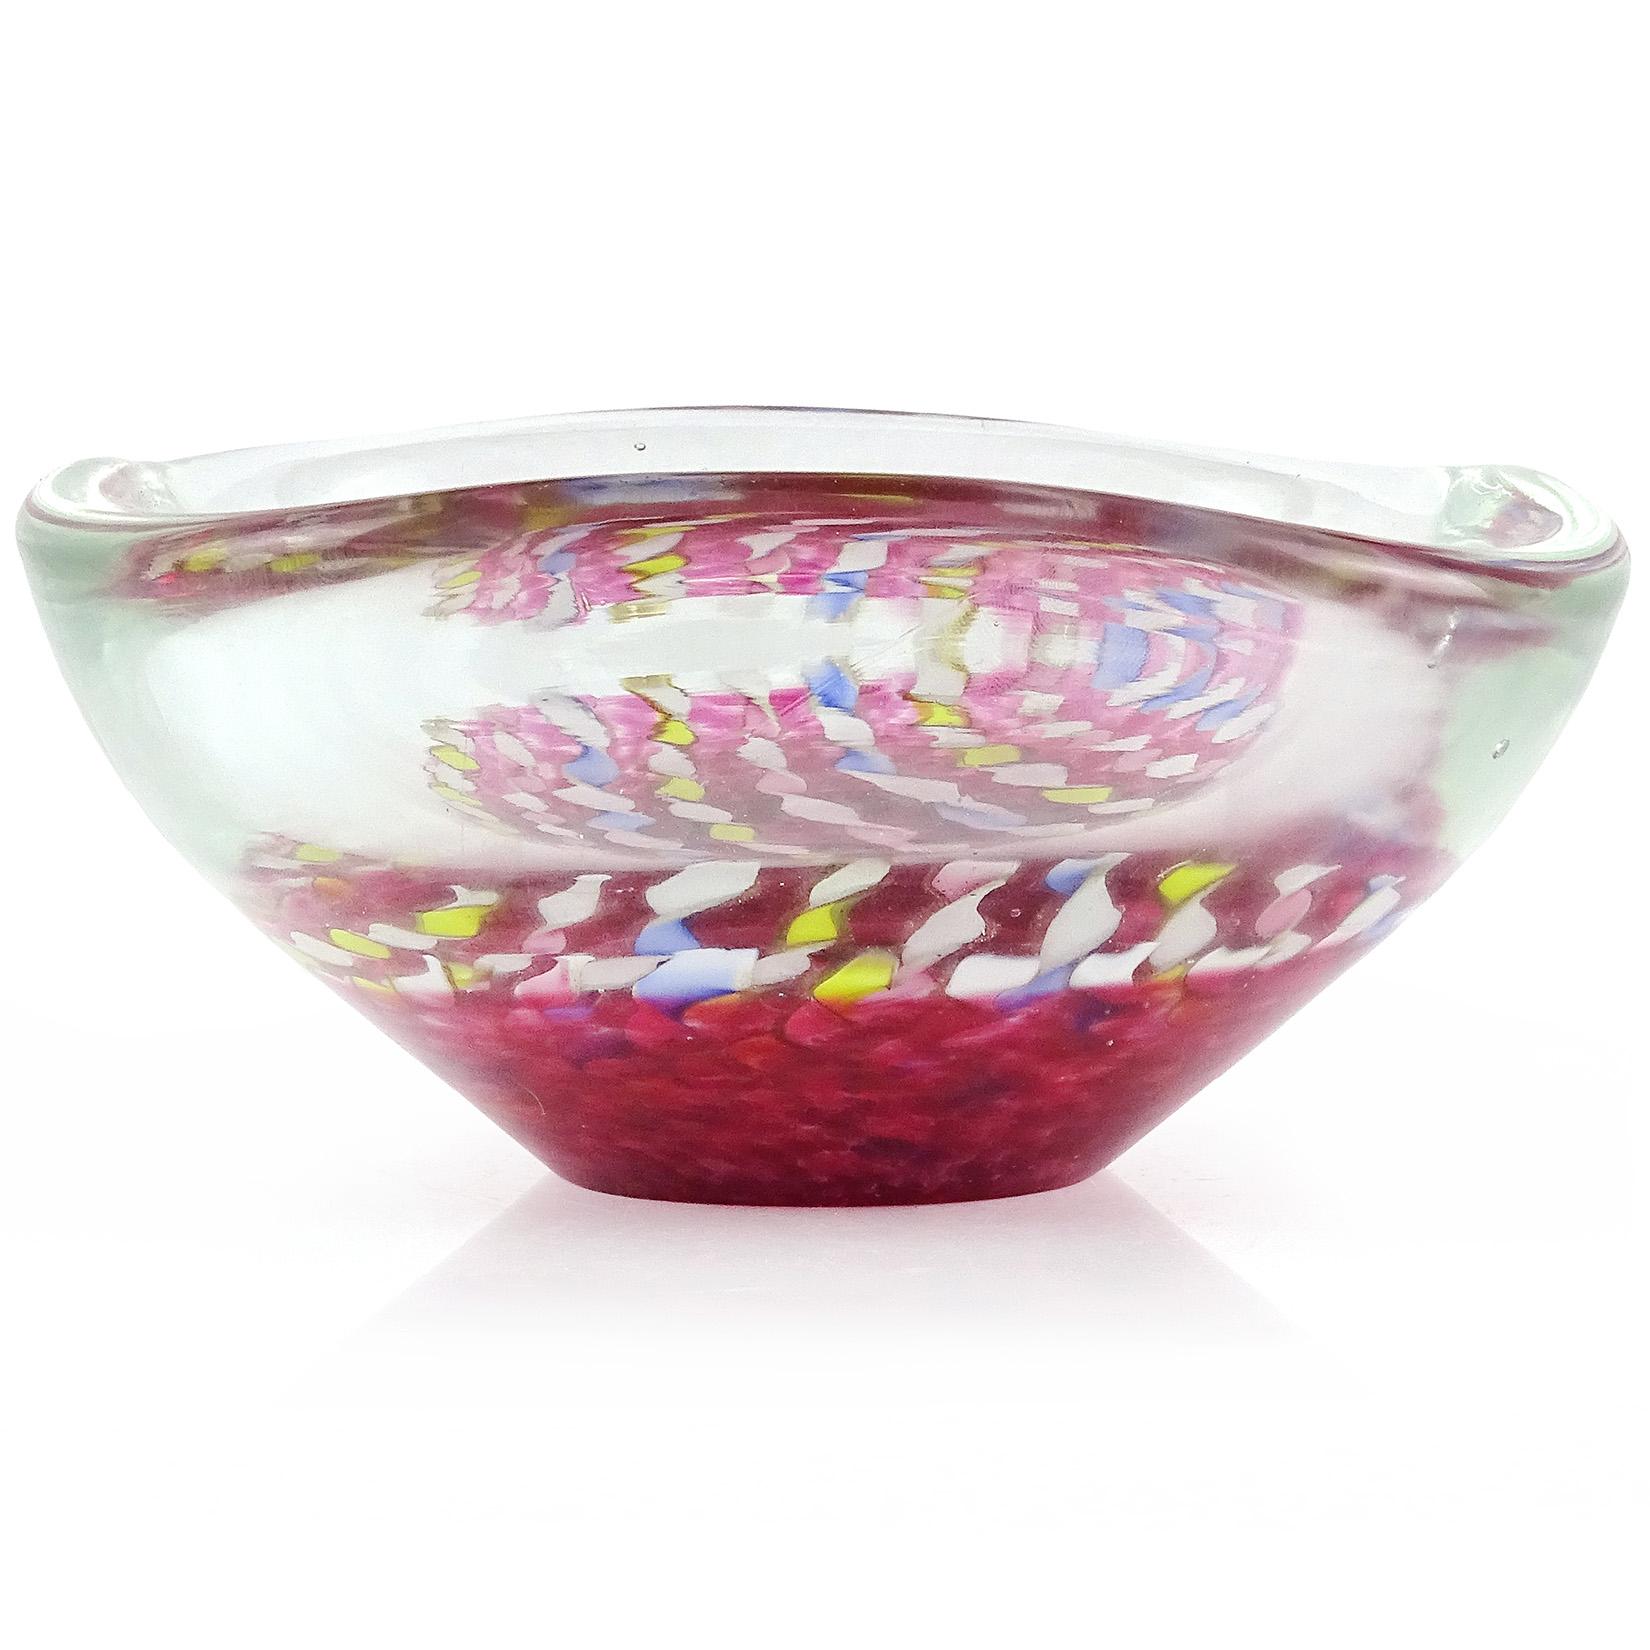 Beautiful vintage Murano hand blown twisted blue, pink, yellow, and aventurine ribbons Italian art glass bowl. The ribbons hover over a bed of fuchsia pink dots. Created in the manner of the Seguso and Fratelli Toso companies. Made with very thick